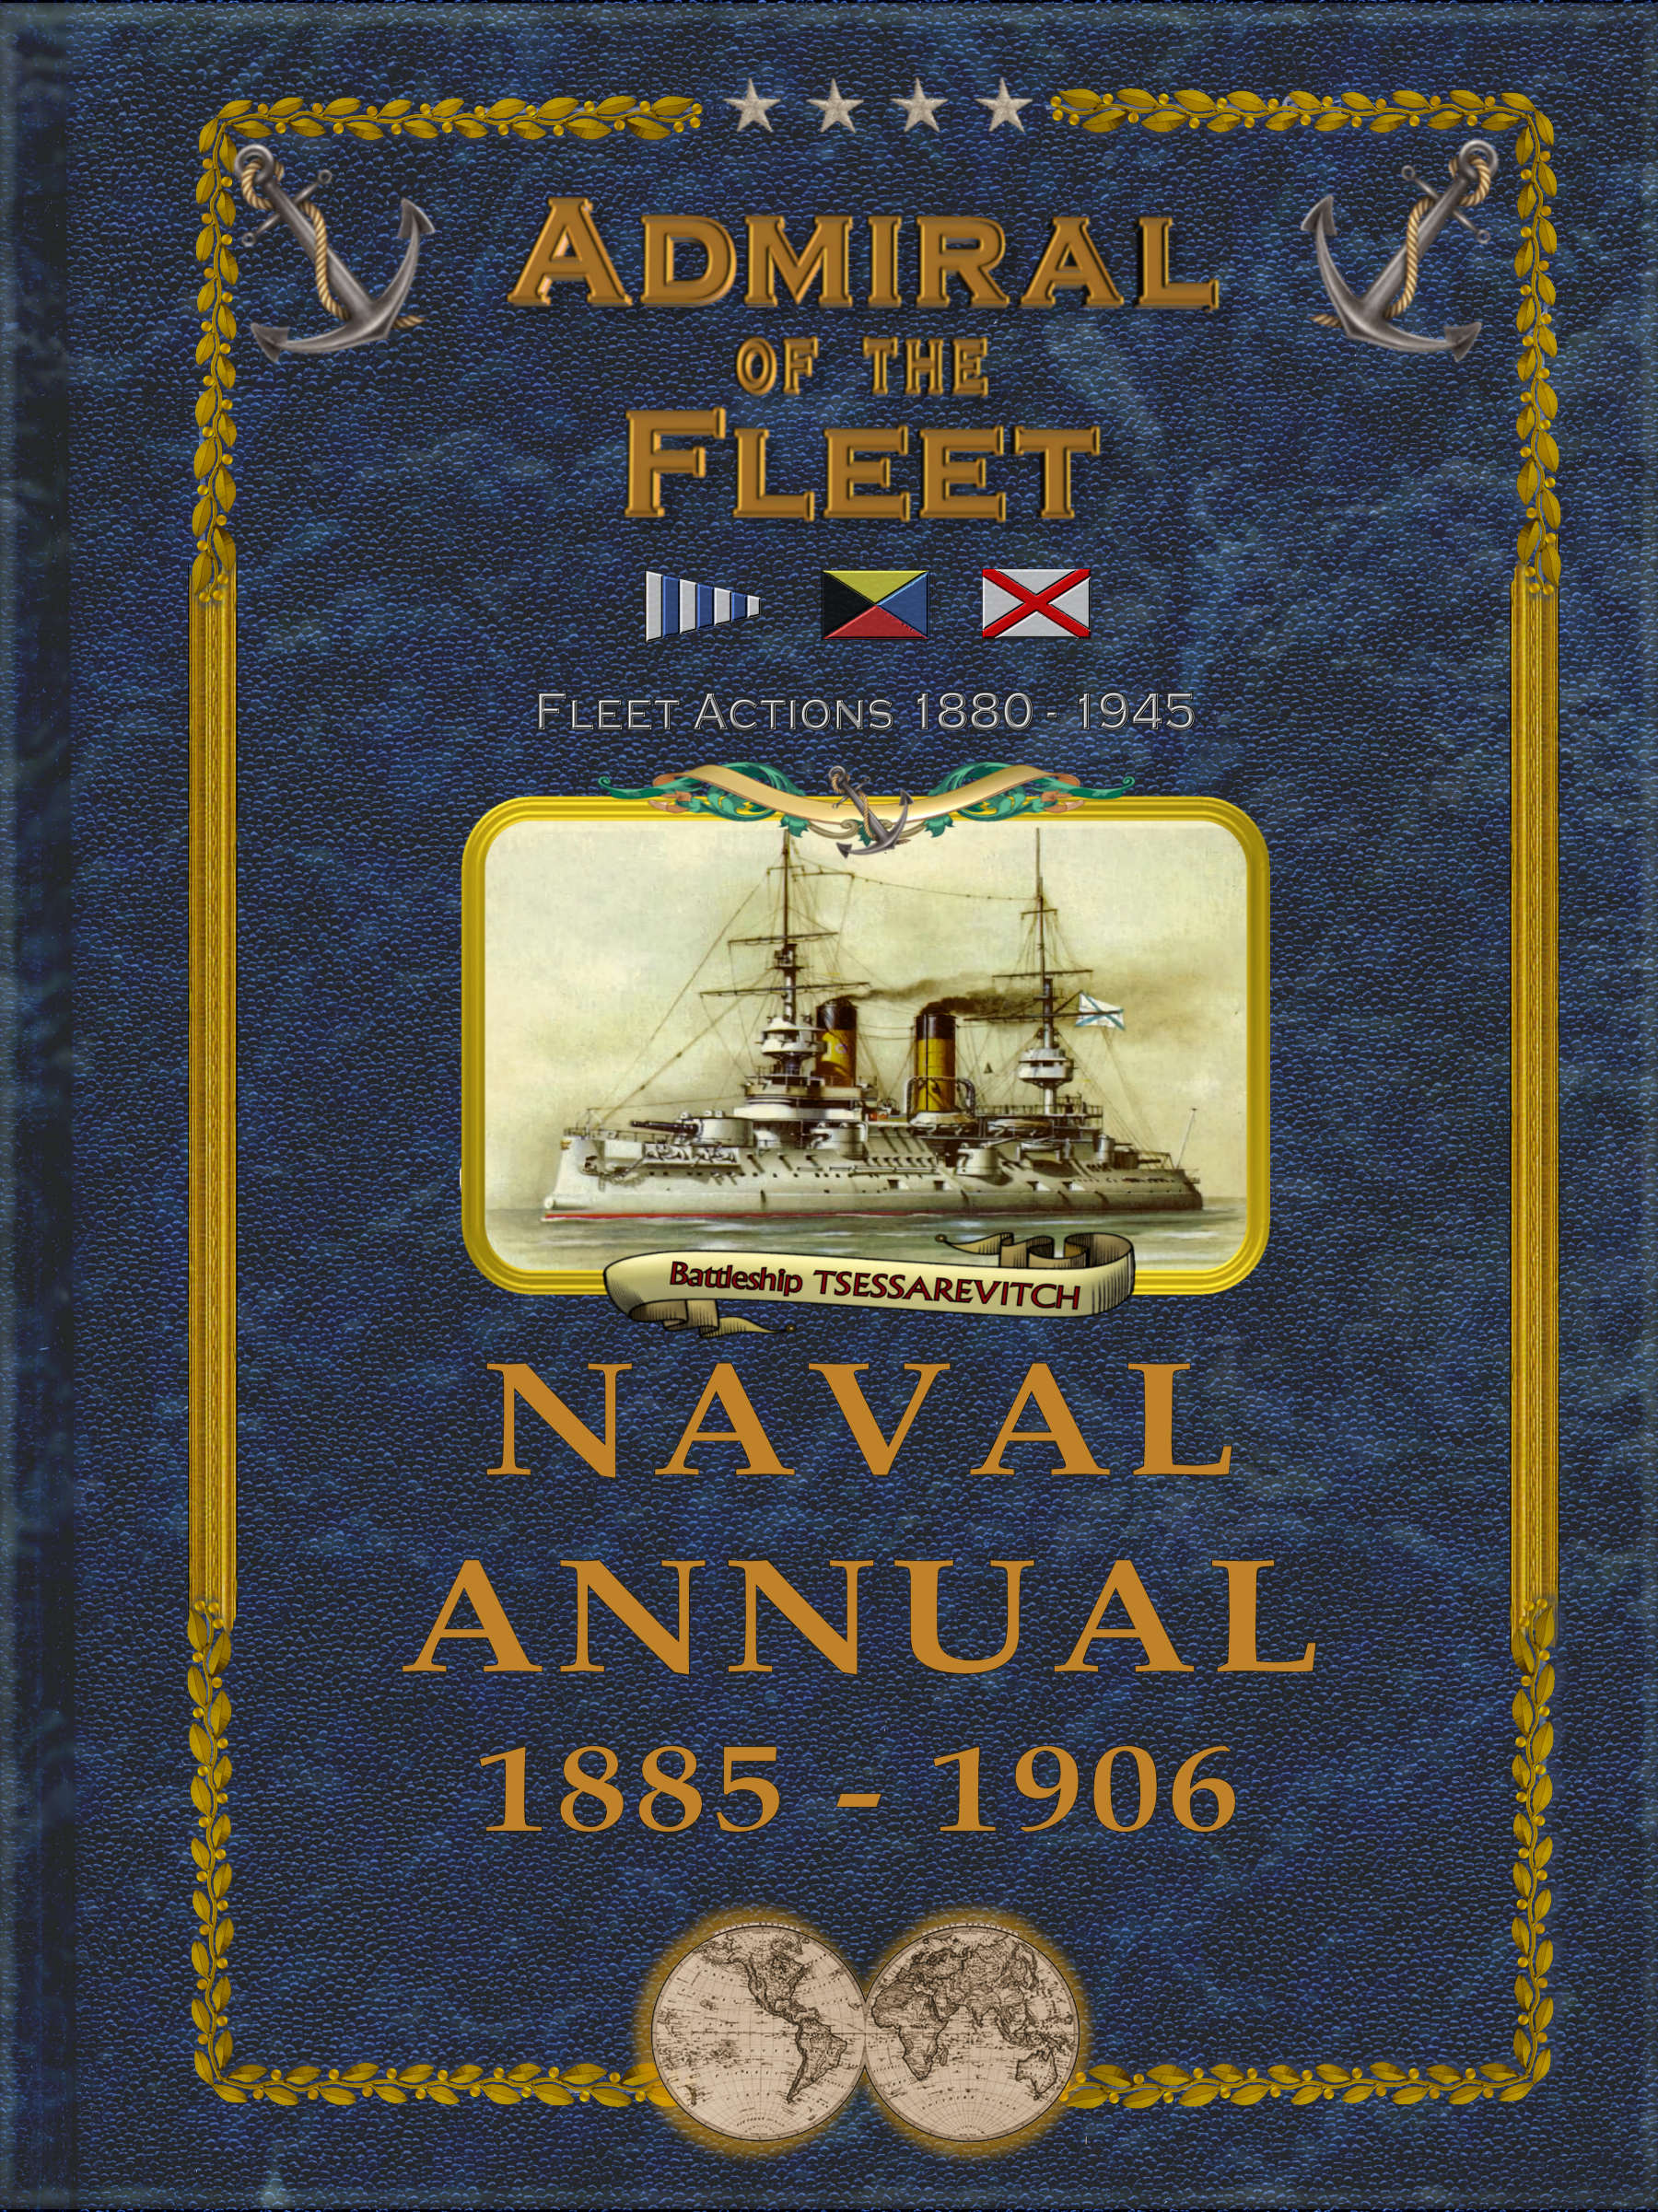 Admiral of the Fleet - Naval Annual 1885-1906